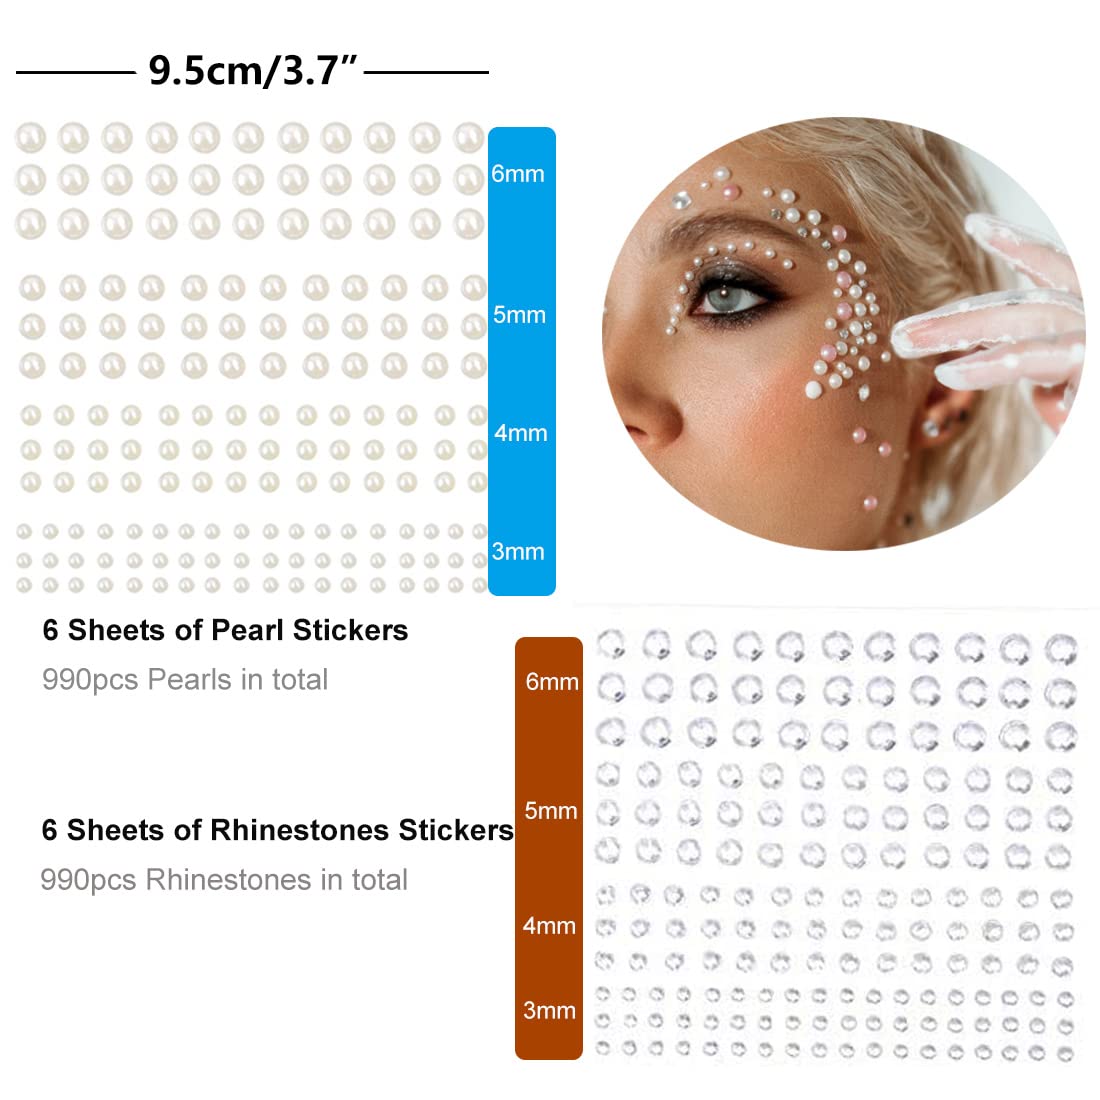 12 Sheets (1980pcs) Clear Rhinestones & Pearl Stickers Self Adhesive, TuNan Crystal Stickers Diamond Stickers Bling for Face Beauty Makeup Nail Art Cell Phone DIY Crafts